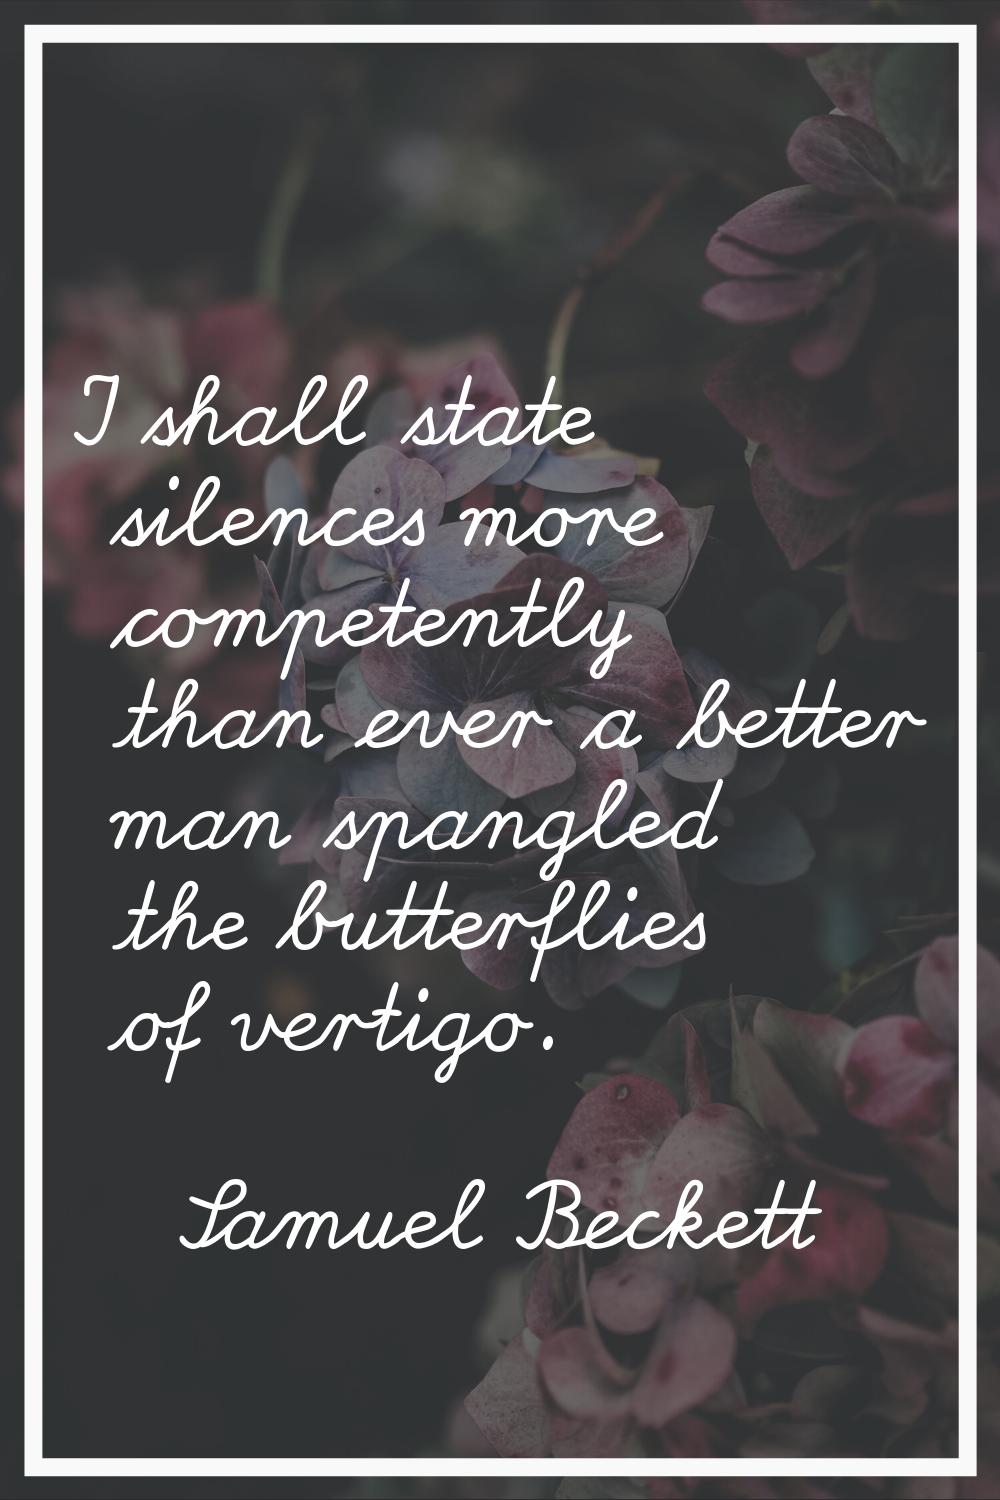 I shall state silences more competently than ever a better man spangled the butterflies of vertigo.